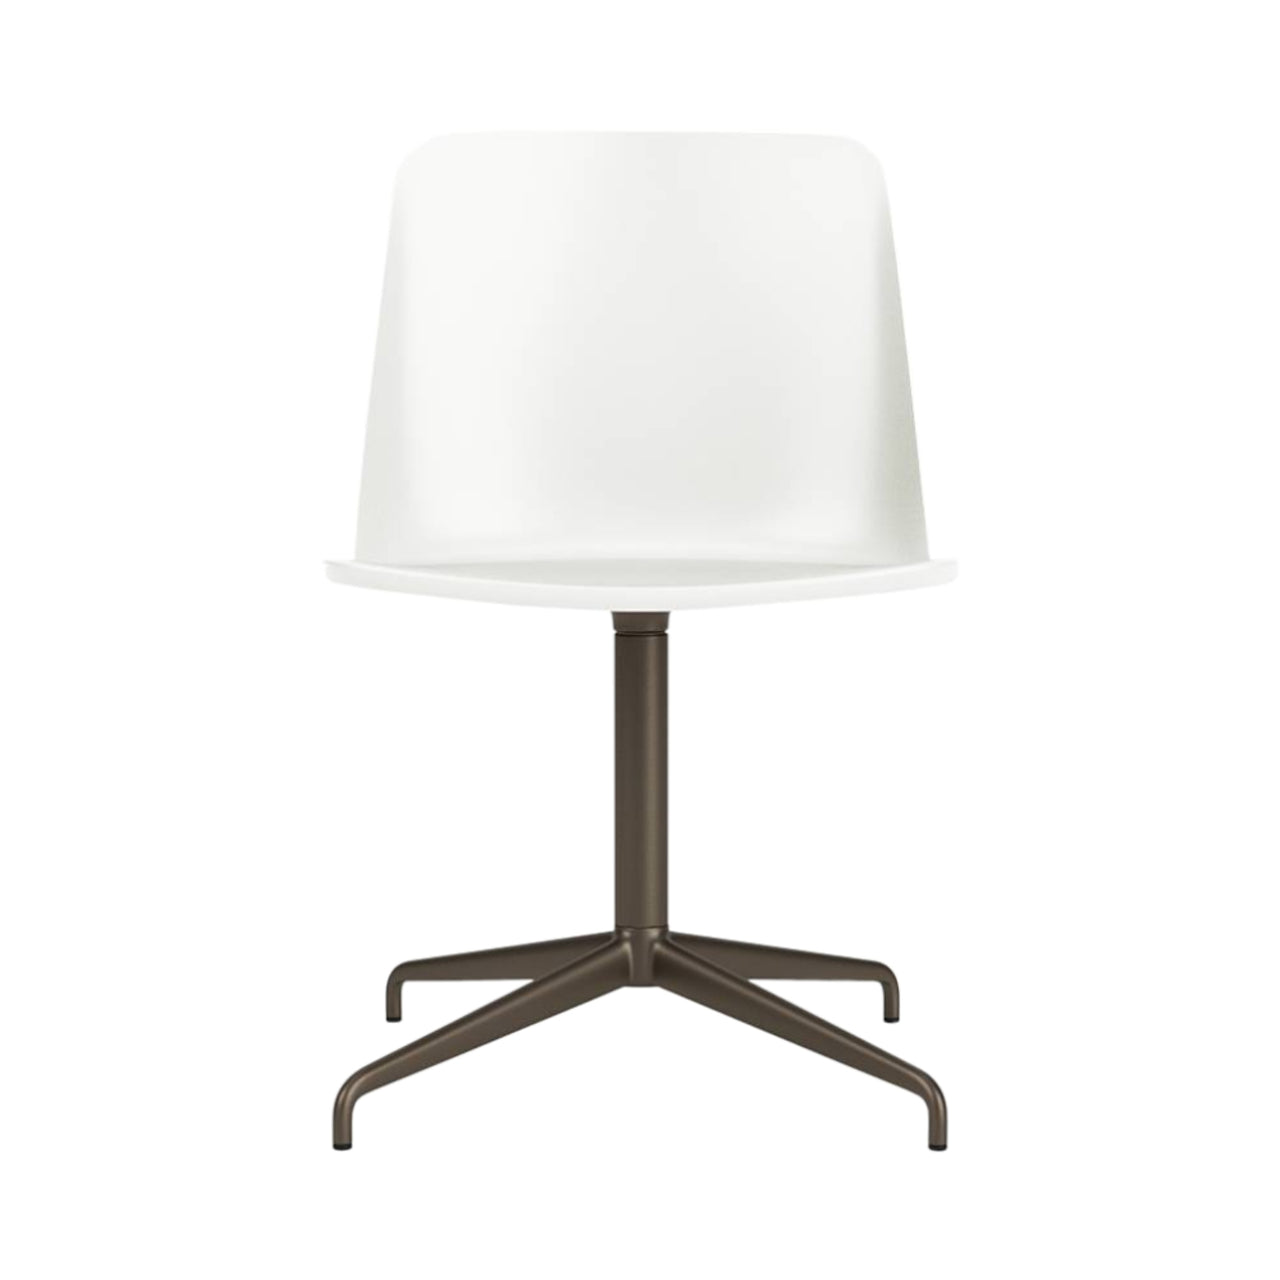 Rely Chair HW11: White + Bronzed